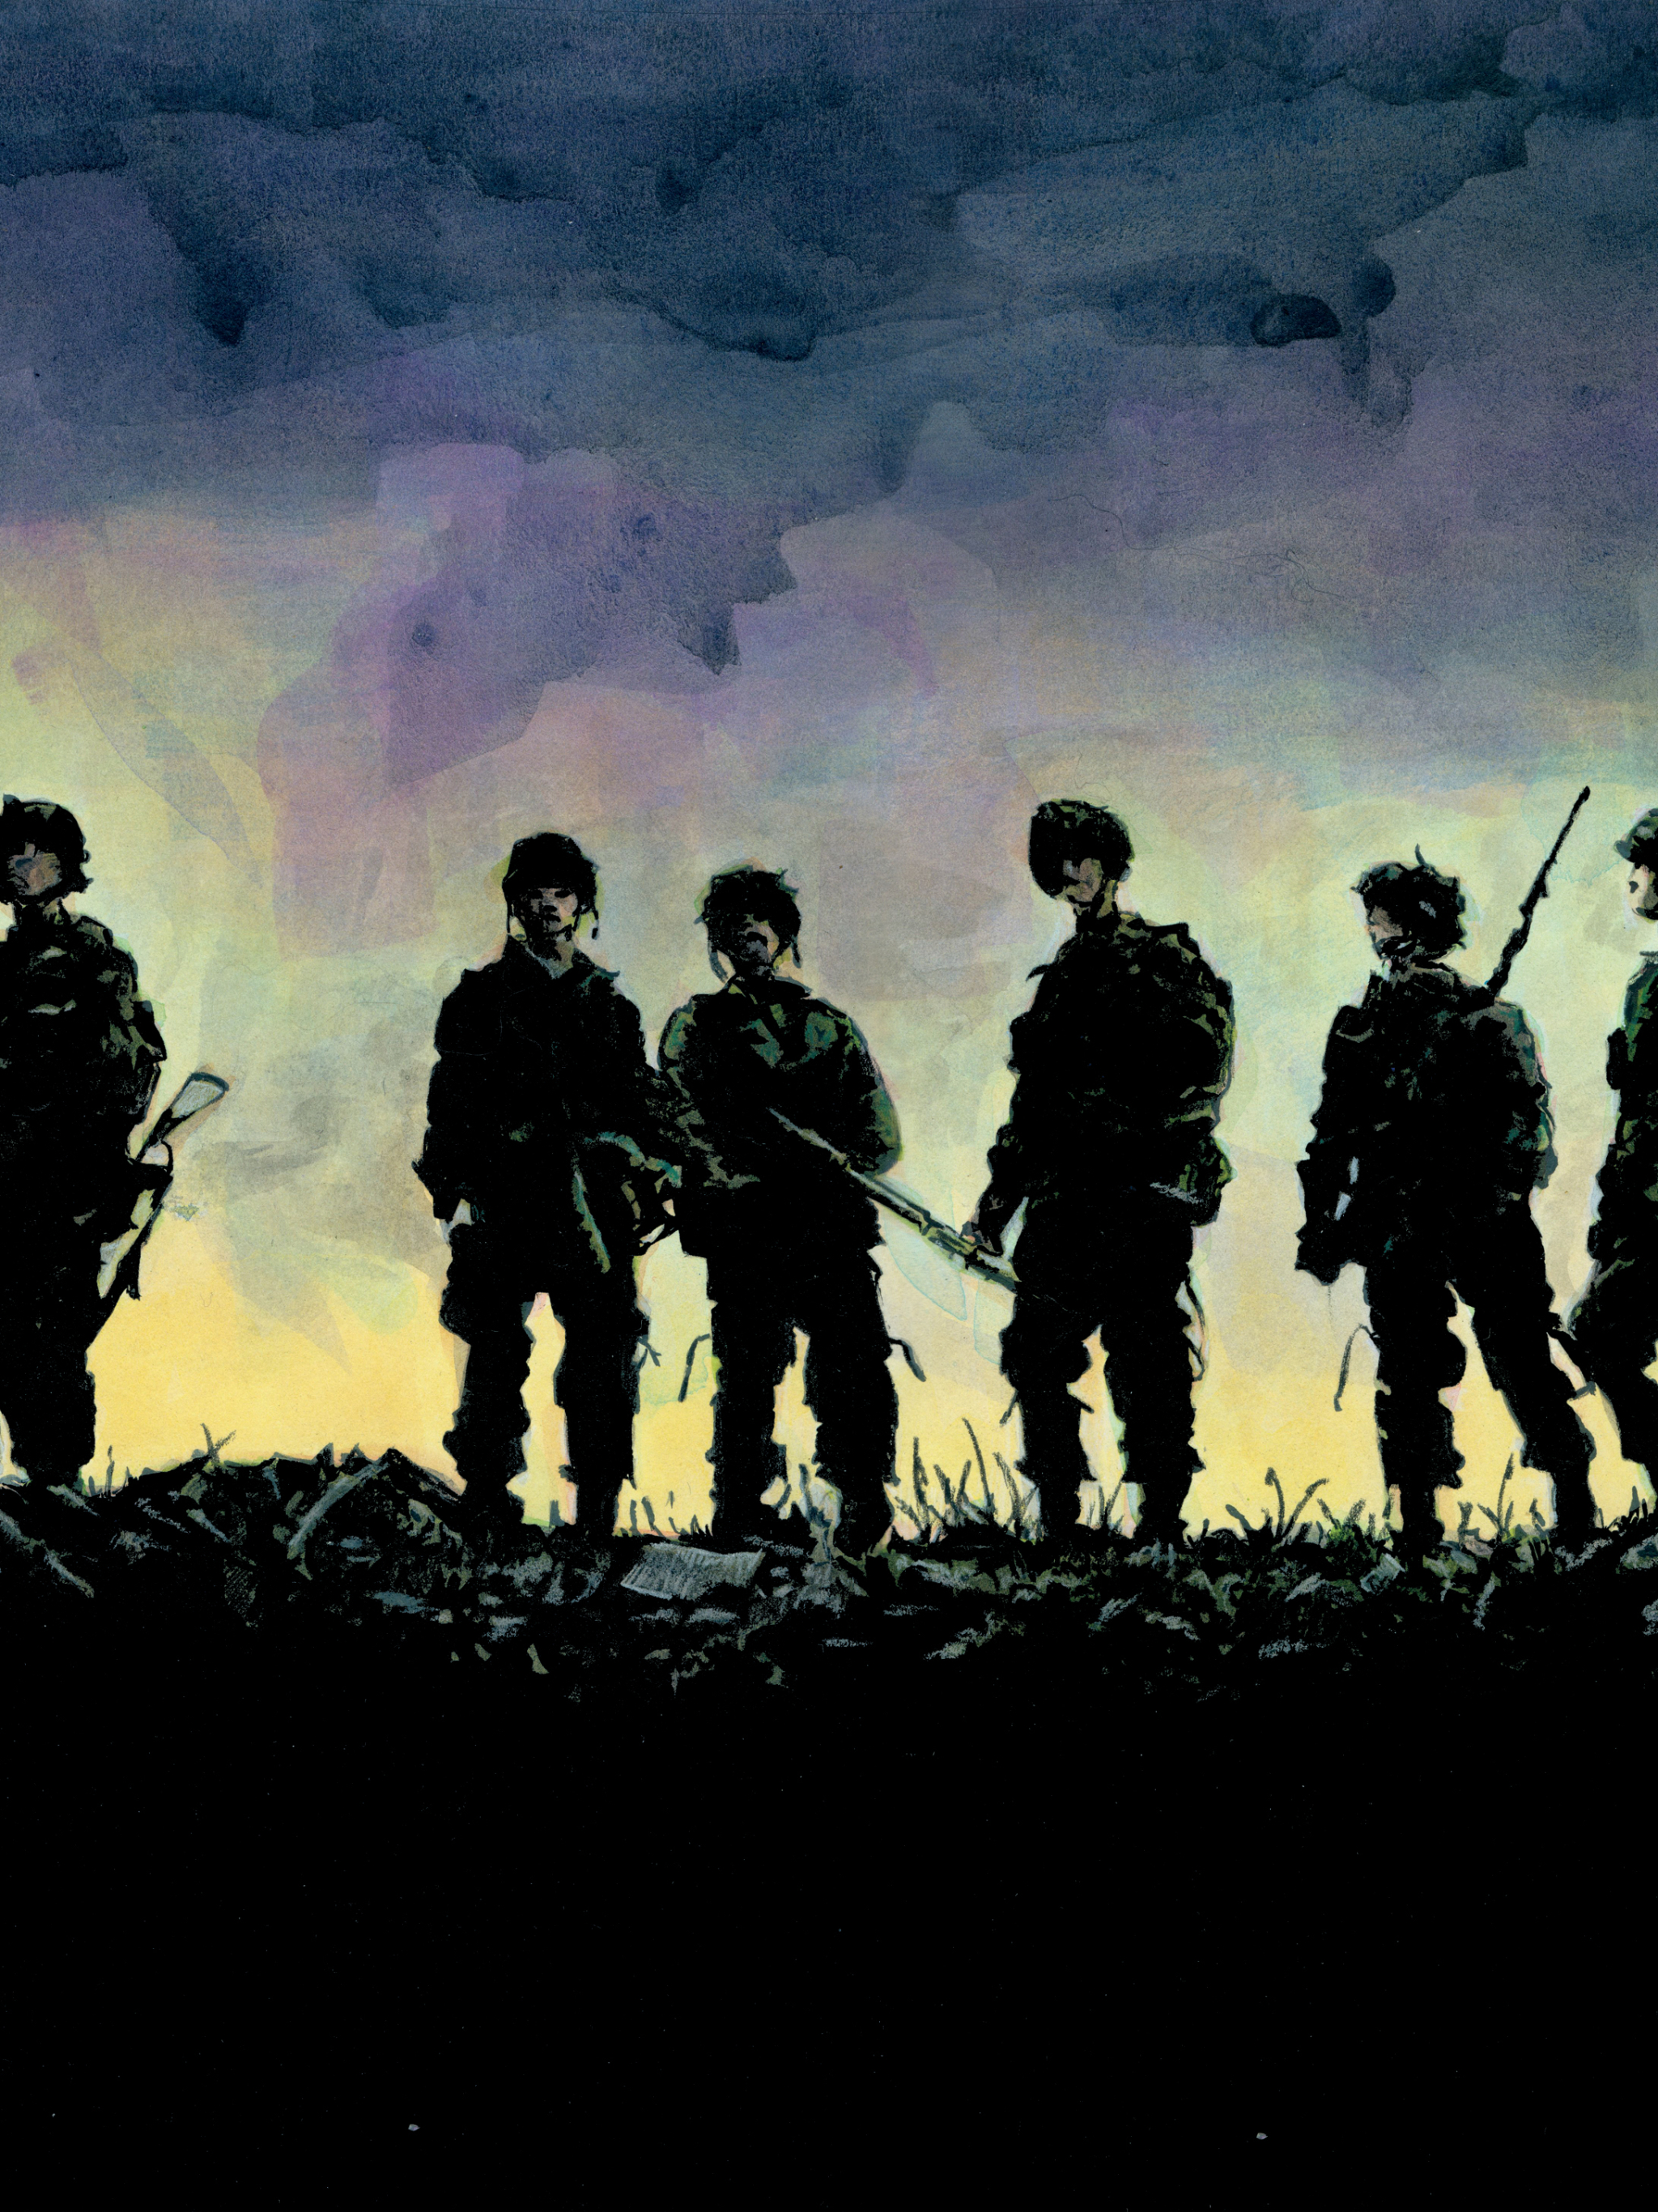 BANDOFBROTHERS war military action drama hbo band brothers soldier battle  e wallpaper  2400x1565  207566  WallpaperUP